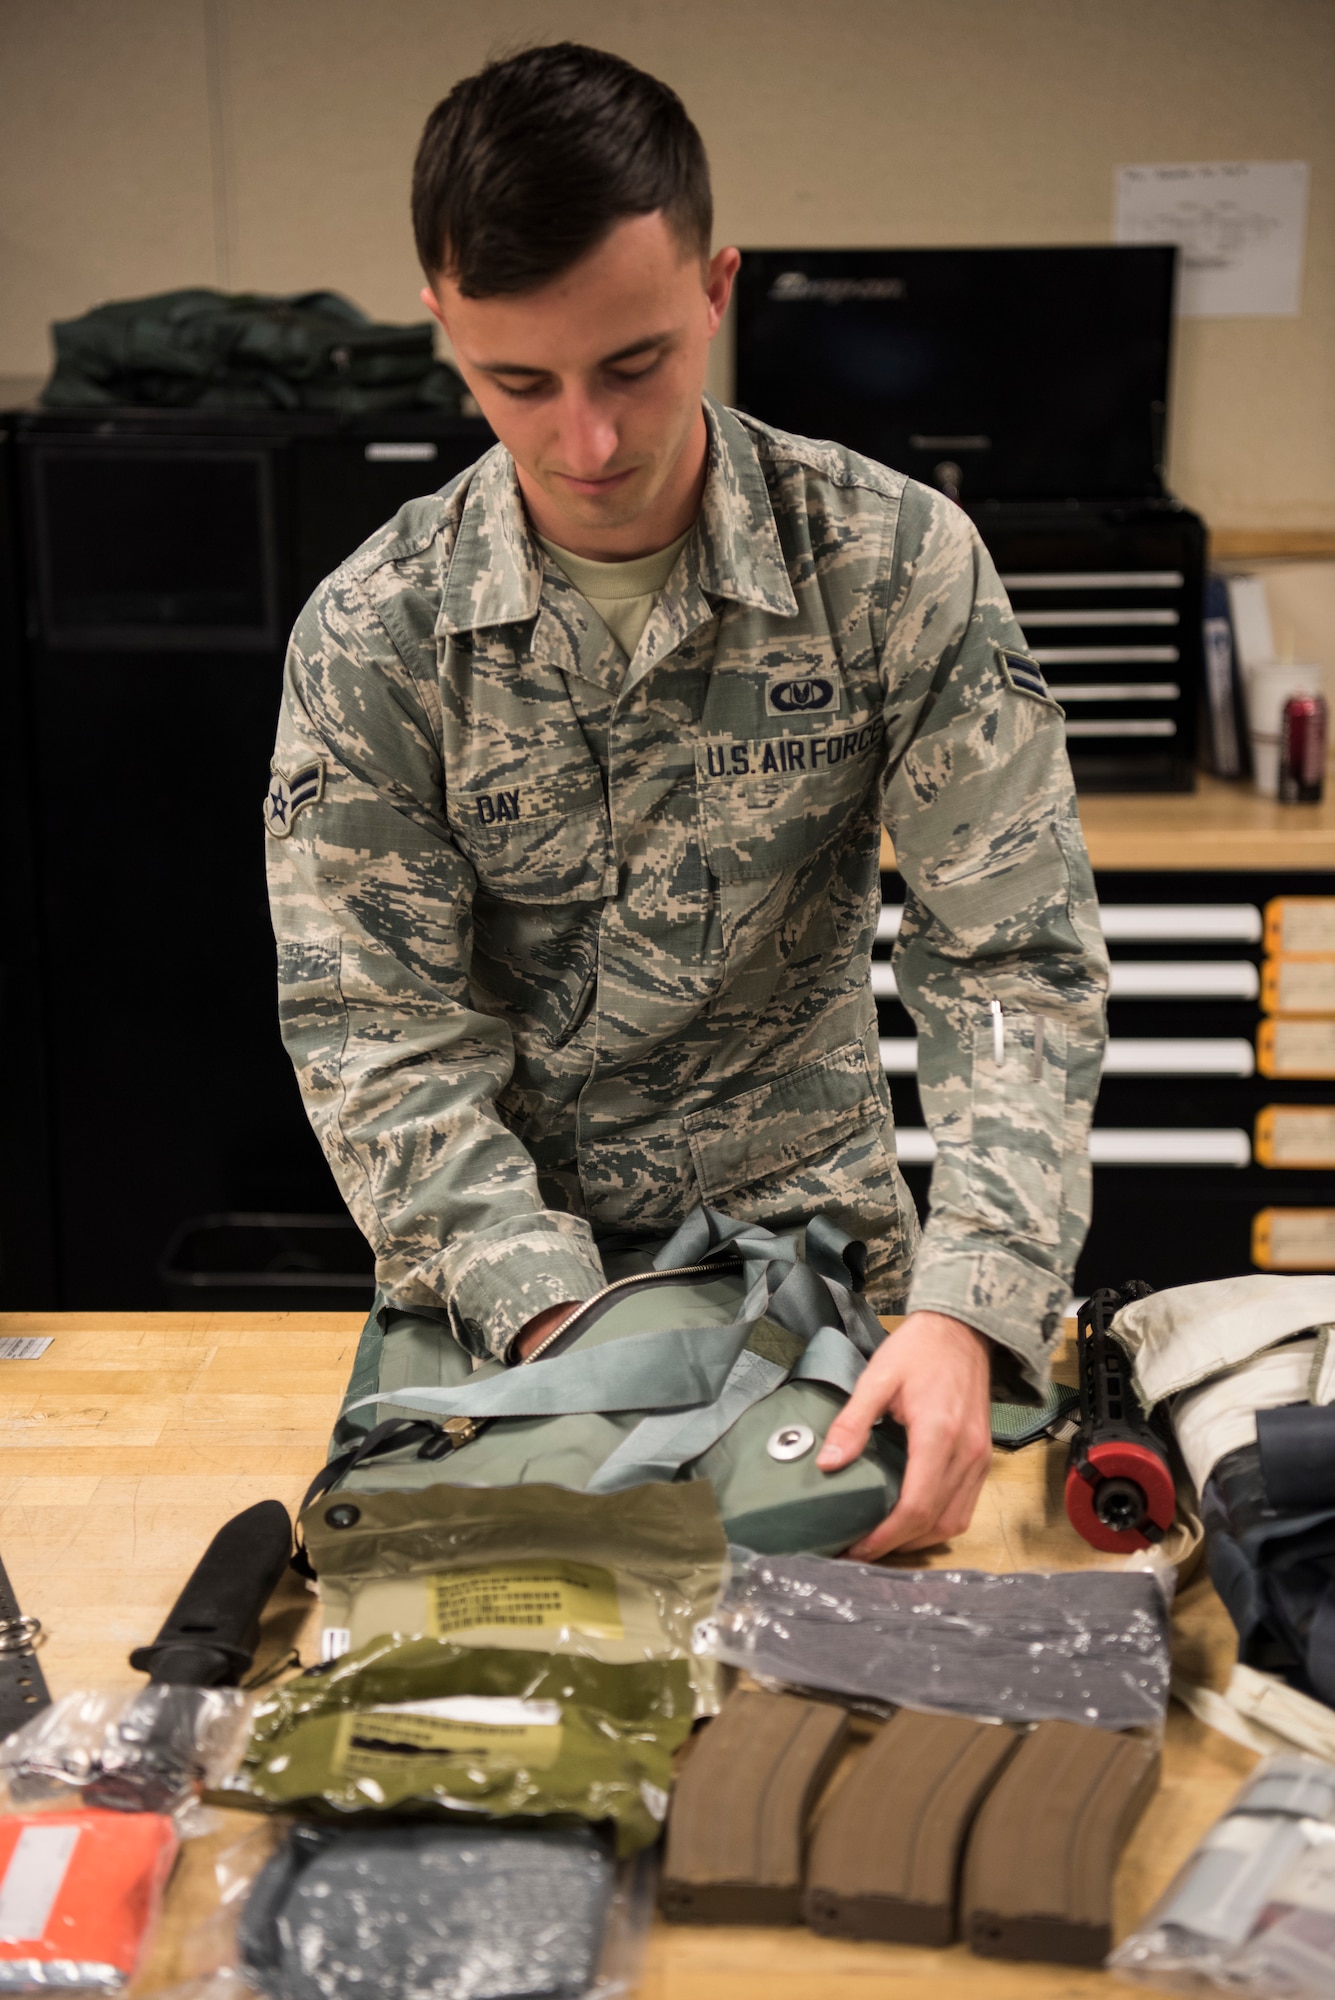 Airman First Class Zack Day, 366th Operation Support Squadron aircrew flight equipment apprentice, packs an ACES II survival kit May 6, 2019, at Mountain Home Air Force Base, Idaho. The kit is provided for every aircrew member in the event they must eject during an emergency. It includes flares, a parachute, medical supplies, flotation devices, flashlight, weaponry and more. (U.S. Air Force photo by Airman First Class Andrew Kobialka)